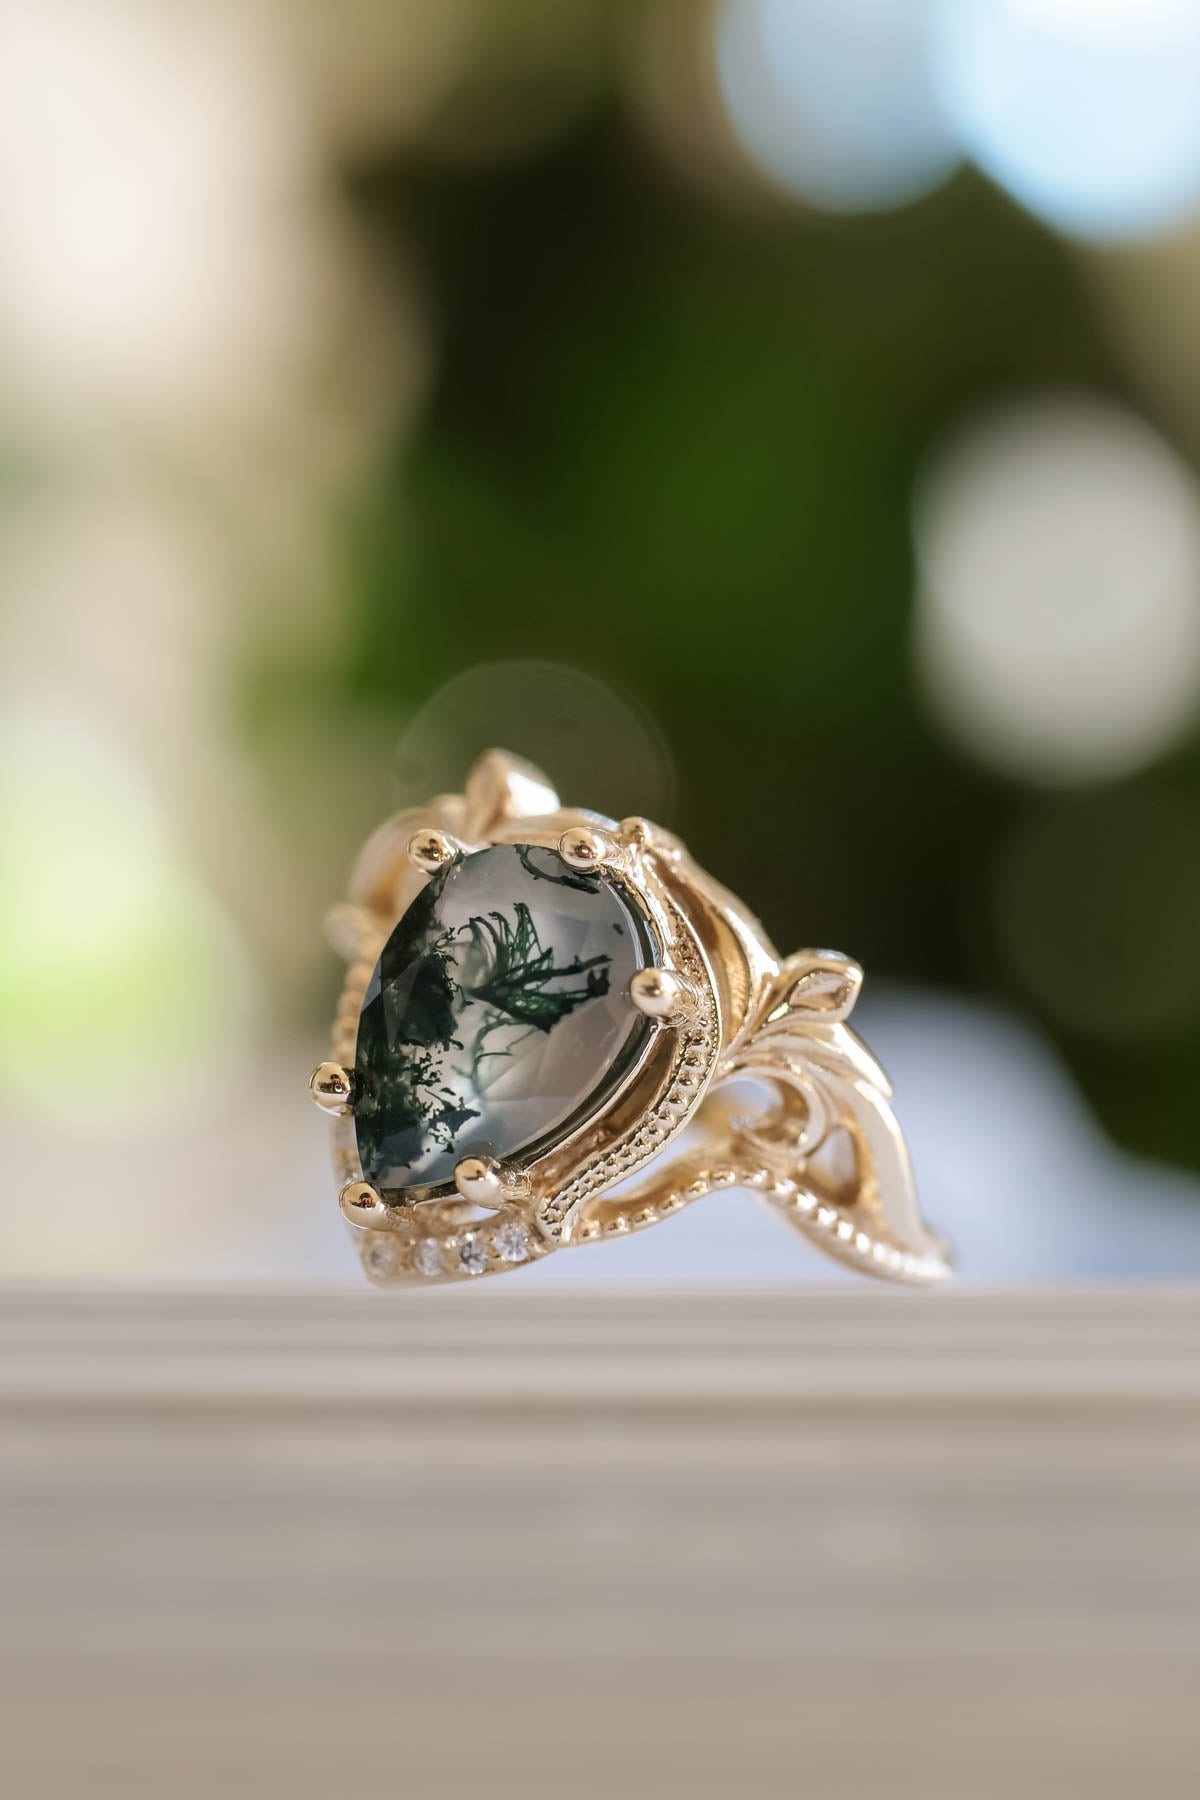 Moss agate rose gold ring, unique statement ring / Lida - Eden Garden Jewelry™